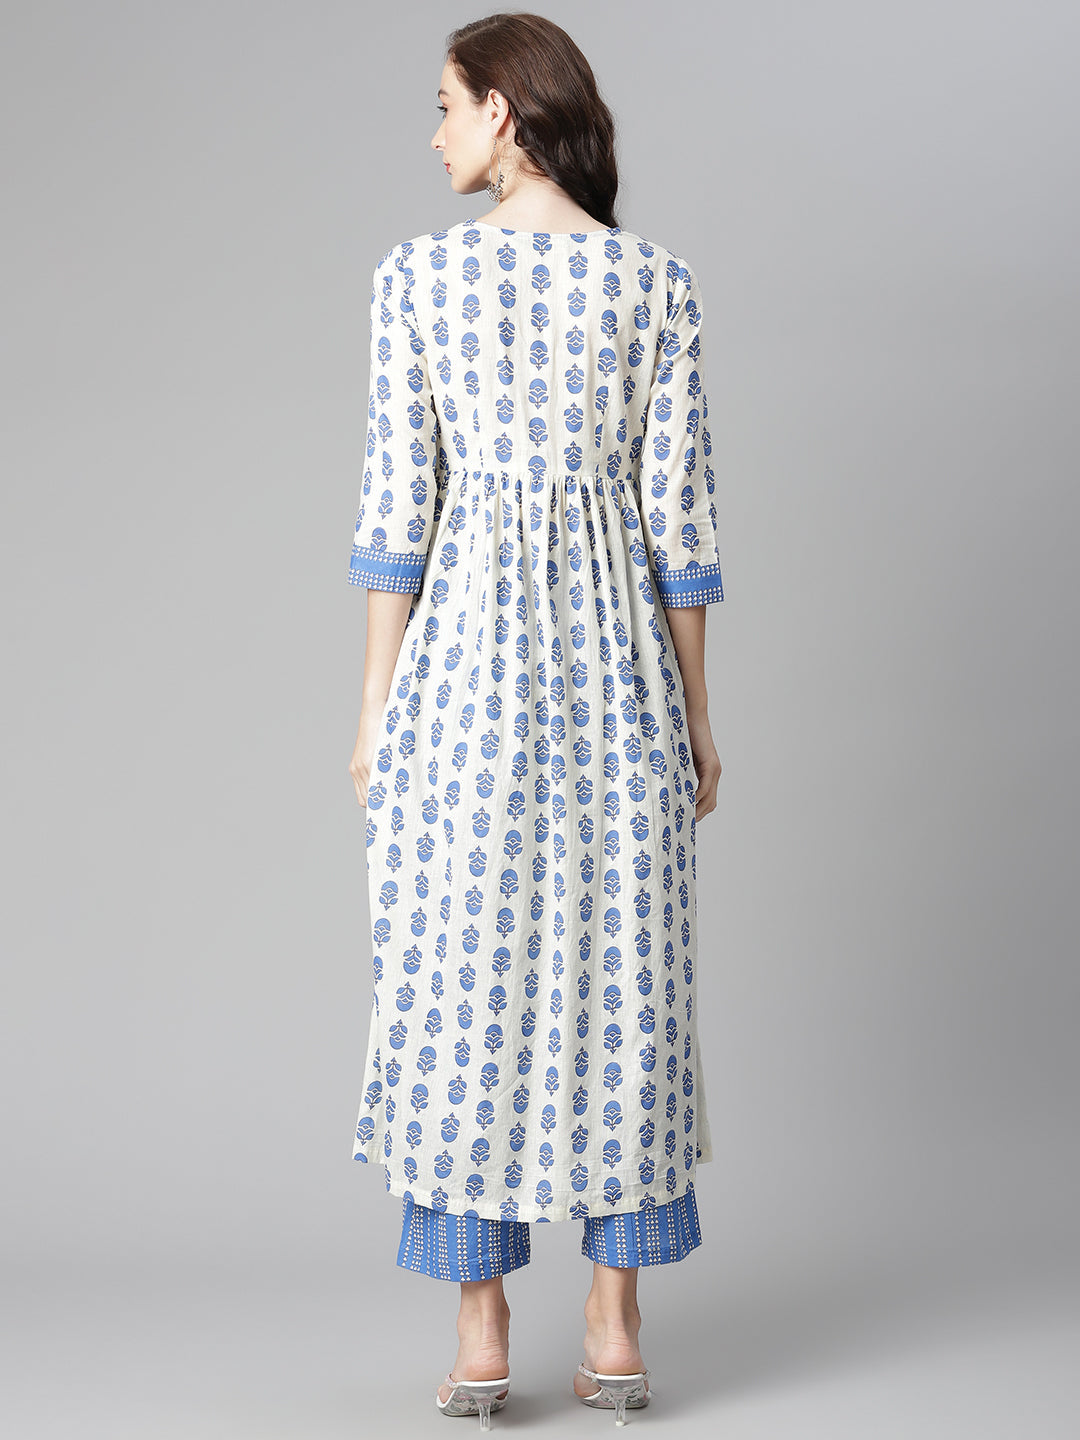 Women's Off-White-Blue Cotton Printed Front Slit A-Line Kurta With Palazzo - Noz2Toz